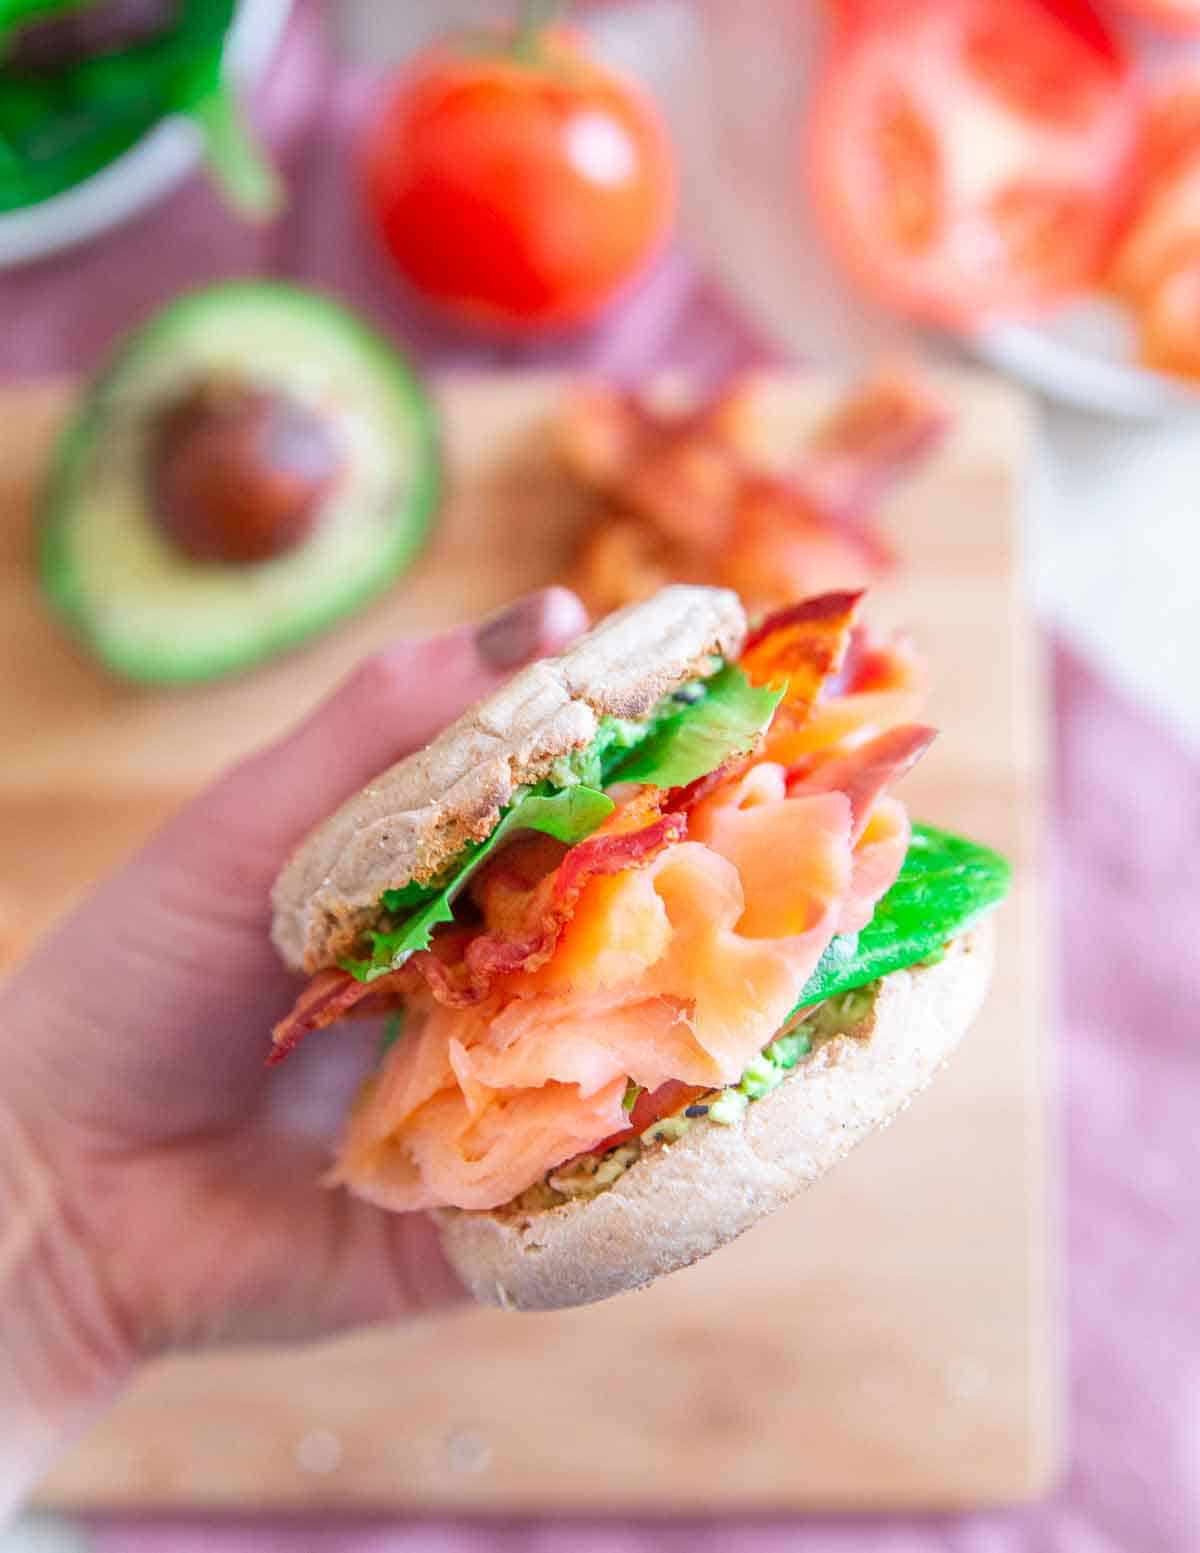 This smoked salmon breakfast BLT is the perfect way to celebrate the weekend. 